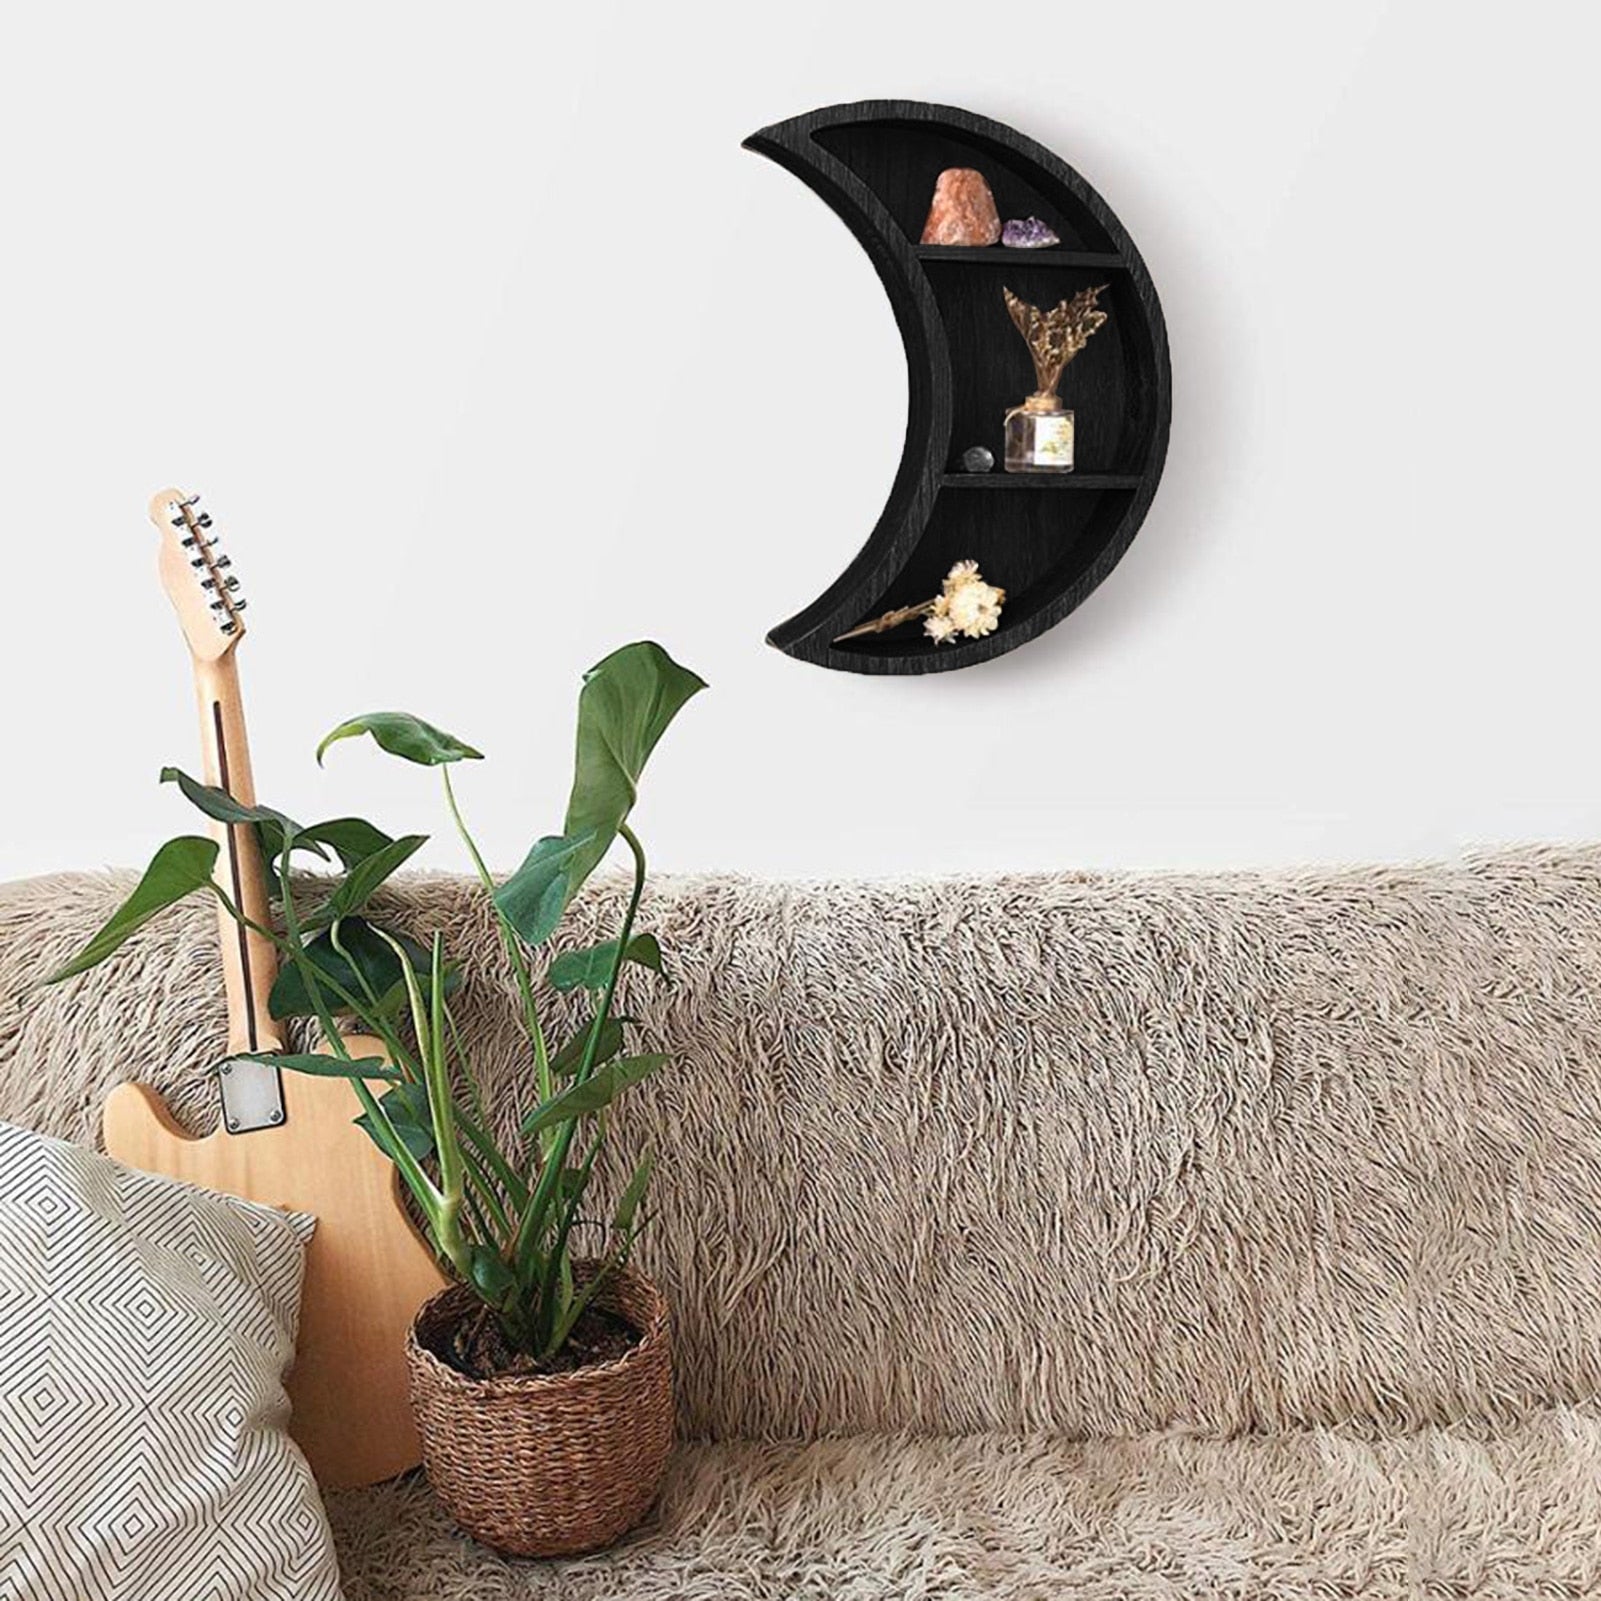 Rustic wooden floating moon-shaped wall-mounted shelf for photos and storage, ideal for space-saving home décor in living rooms and bedrooms.